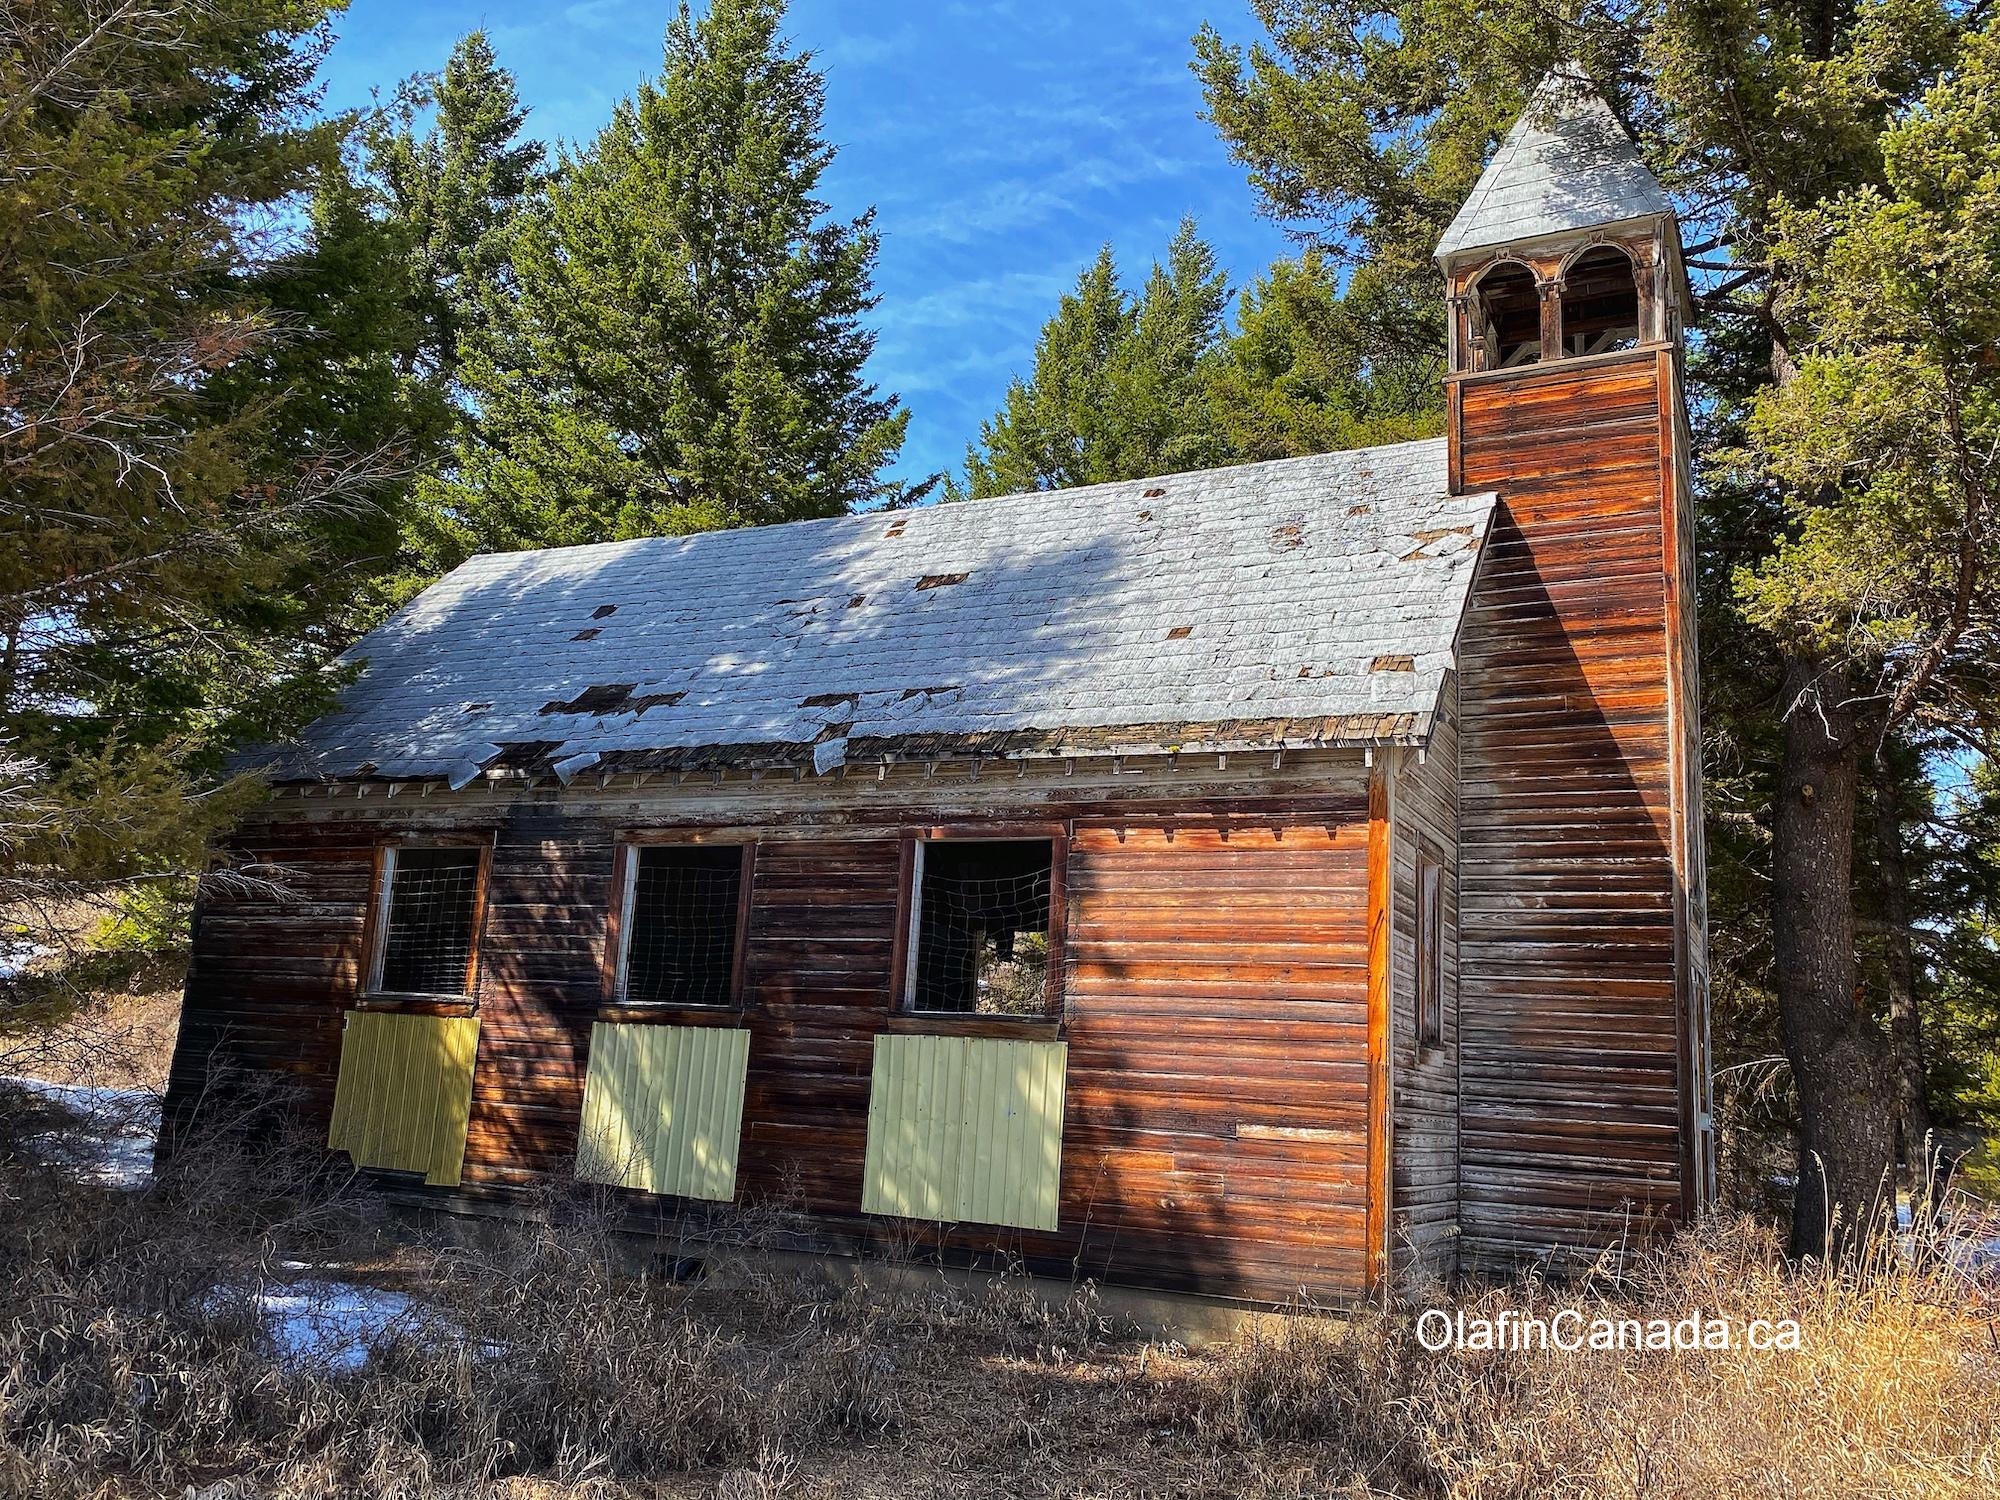 Sacred Heart Catholic Church in Bridesville (Rock Creek Area), built in 1930 by the Dumont family #olafincanada #britishcolumbia #discoverbc #abandonedbc #church